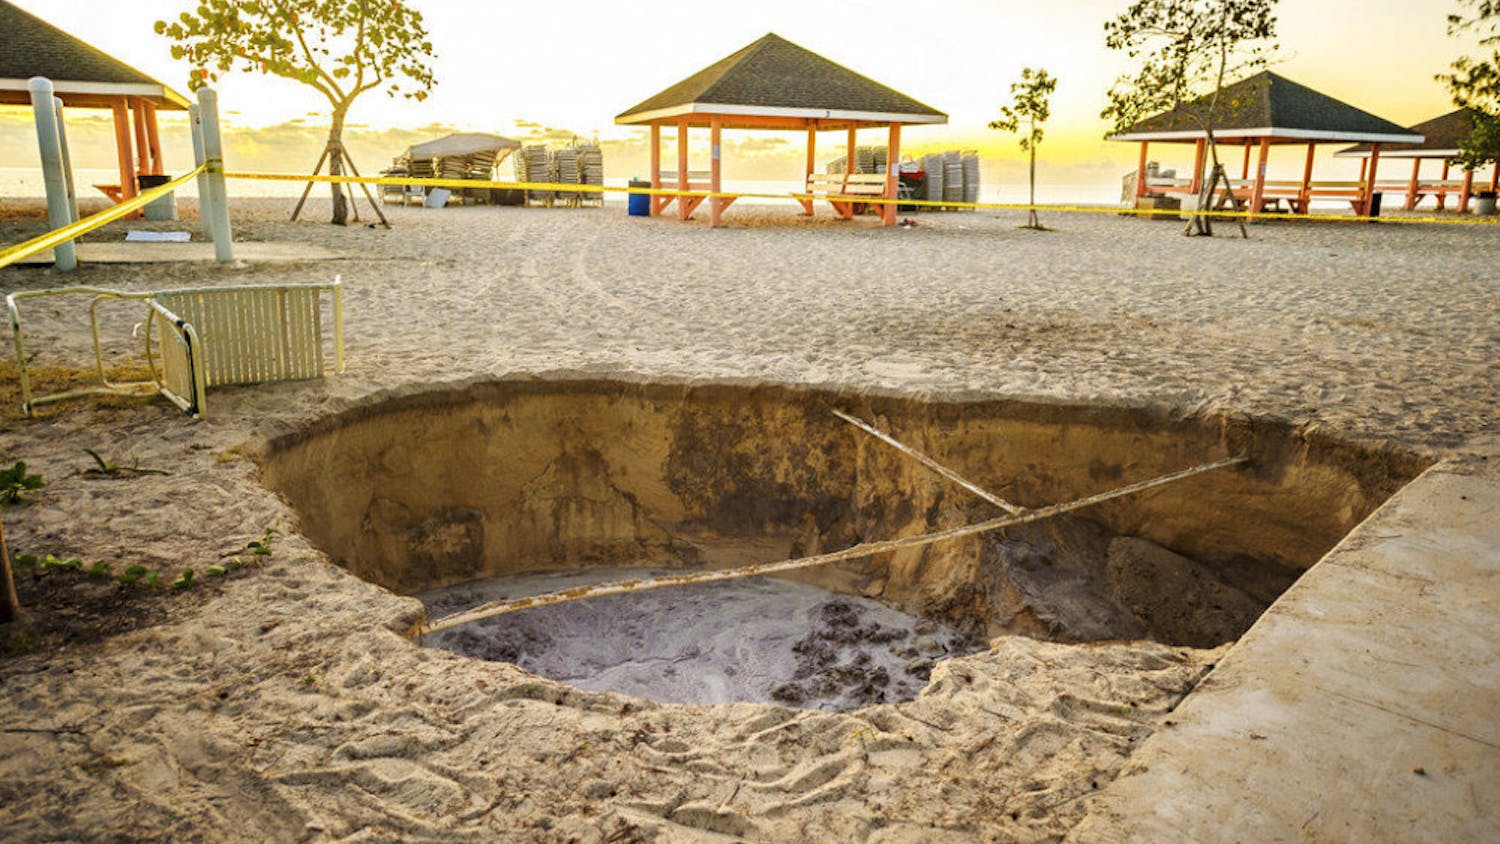 A sinkhole is surrounded by police tape after it appeared when a powerful magnitude 7.7 earthquake struck in the Caribbean Sea between Jamaica and eastern Cuba, at Public Beach on West Bay, Grand Cayman, Tuesday, Jan. 28, 2020. The quake also hit the Cayman Islands, leaving cracked roads and what appeared to be sewage spilling from cracked mains. There were no immediate reports of deaths, injuries or more severe damage. (Taneos Ramsay/Cayman Compass via AP)